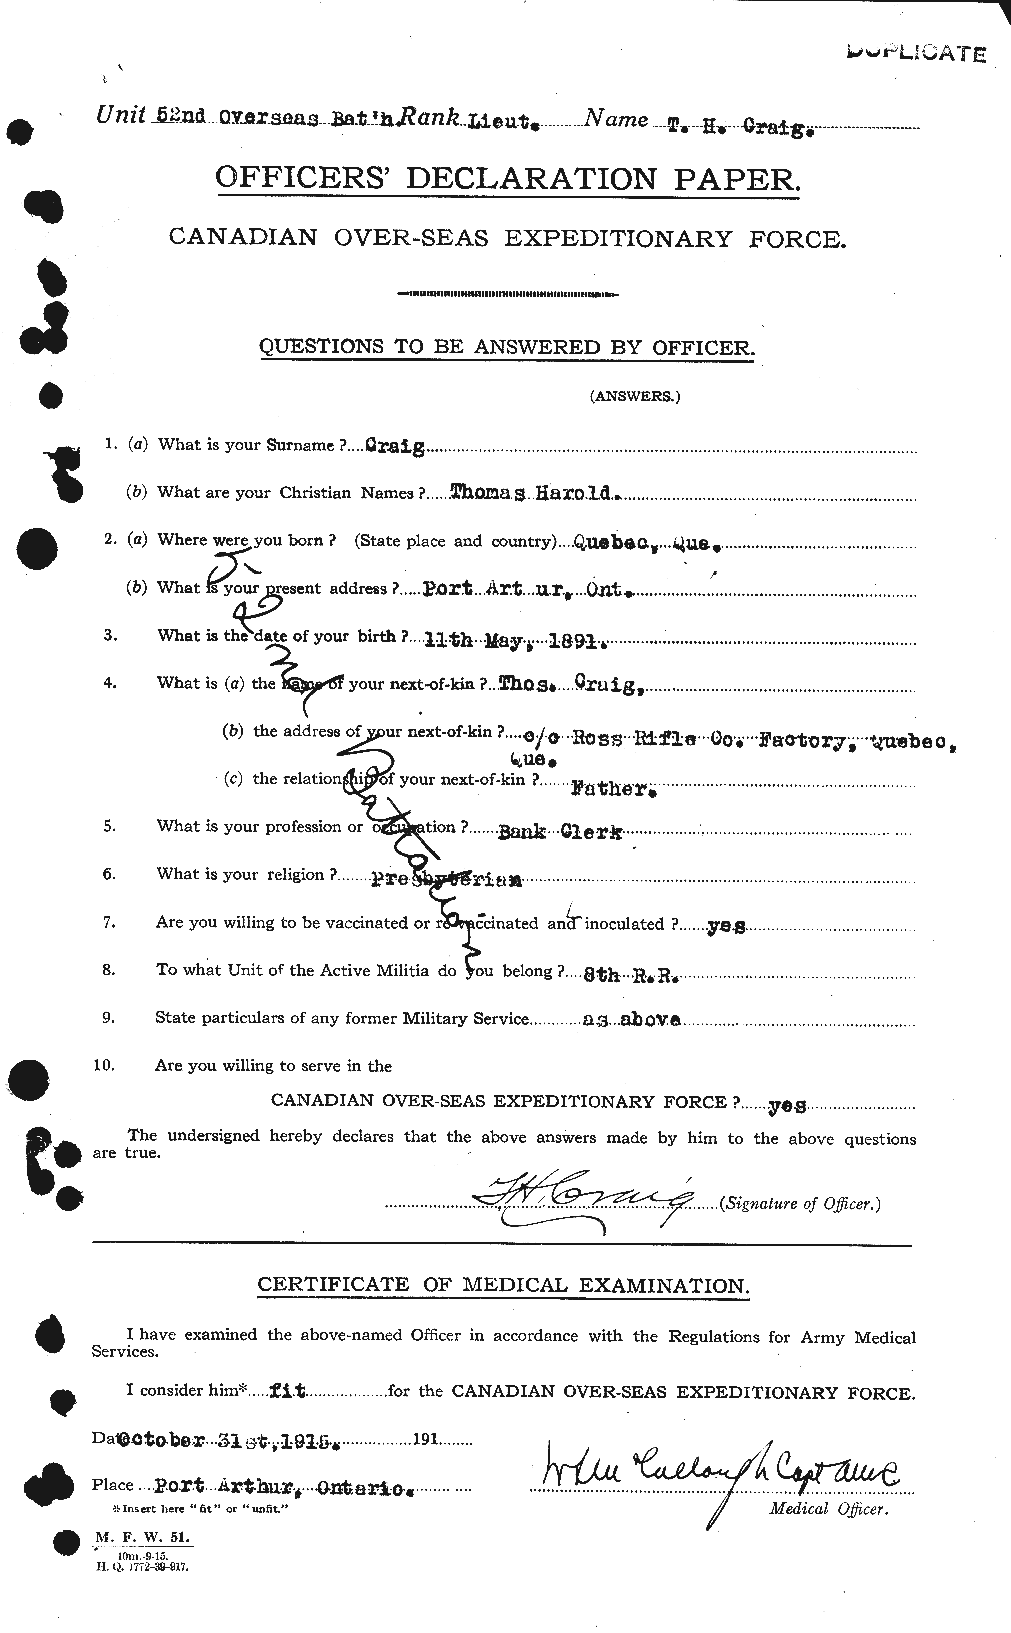 Personnel Records of the First World War - CEF 060439a